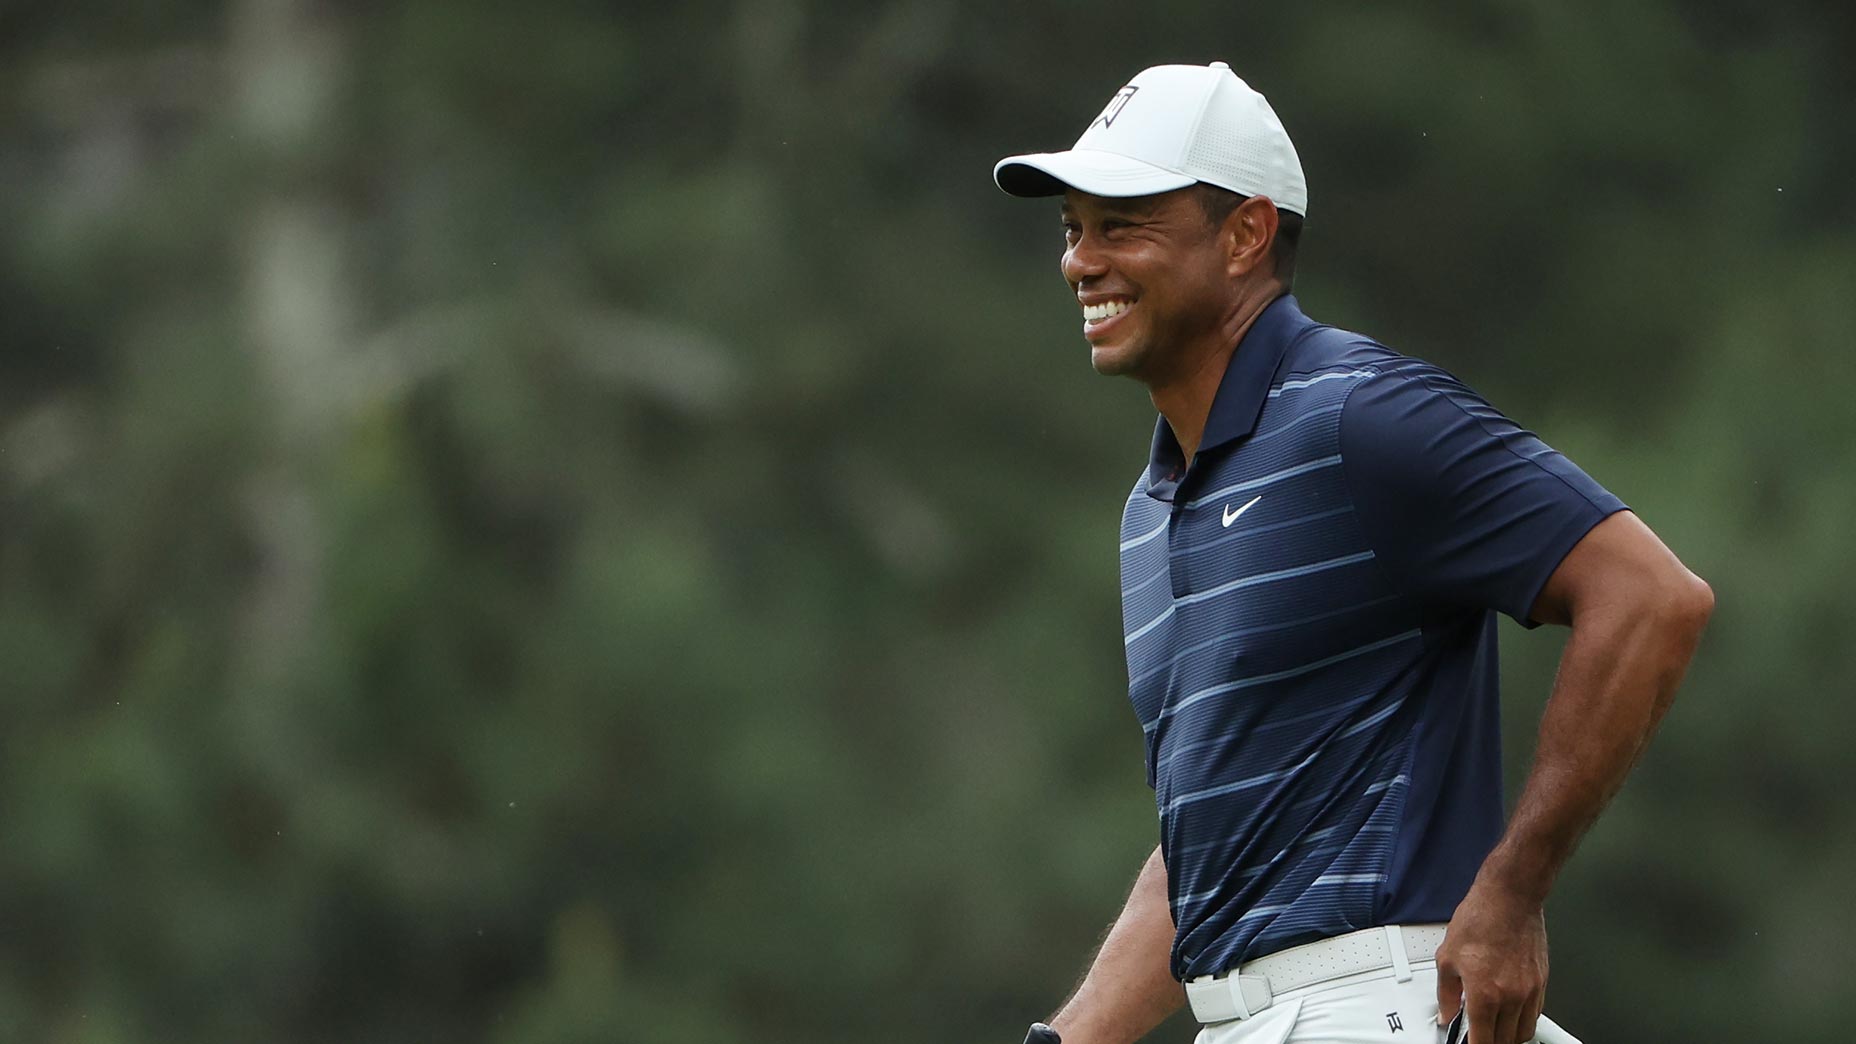 tiger woods smiles in a white hat and blue shirt from a fairway at the masters tournament